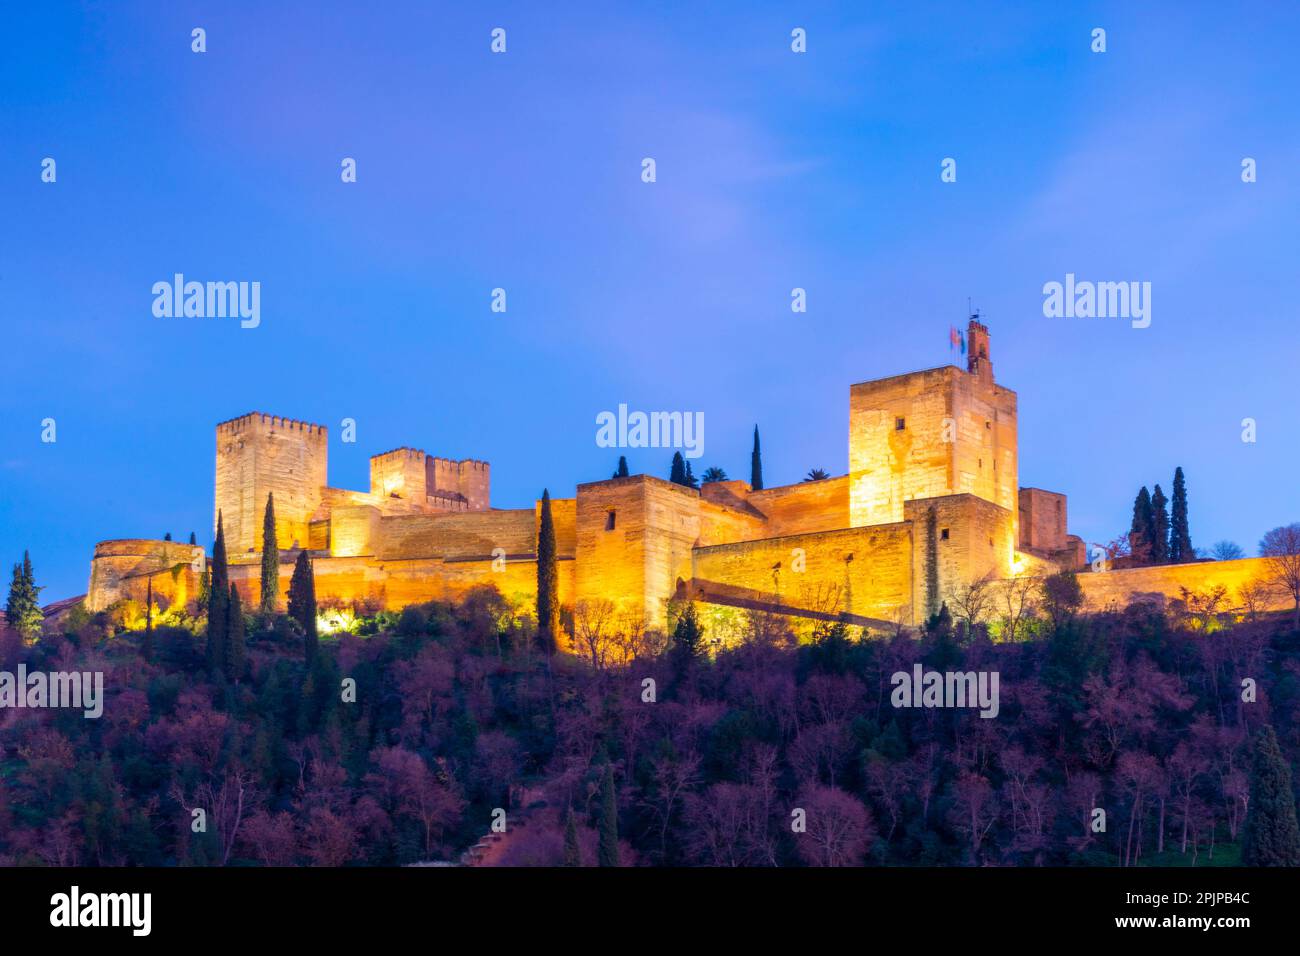 Alhambra at Dusk, Granada, Andalusia, Spain, South West Europe Stock Photo